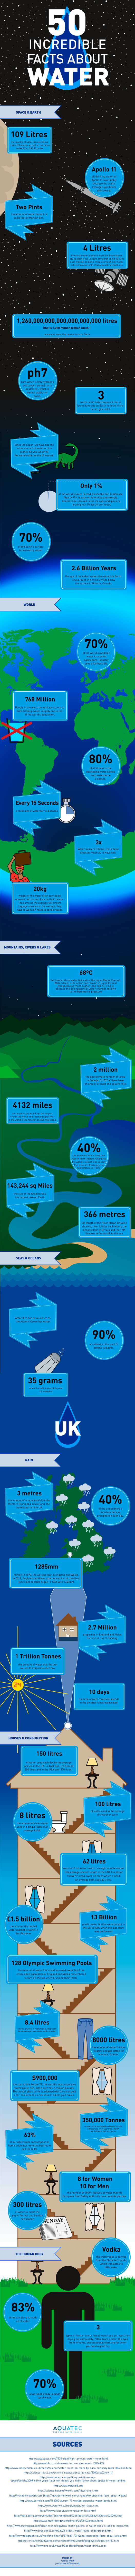 50 Incredible Facts About Water